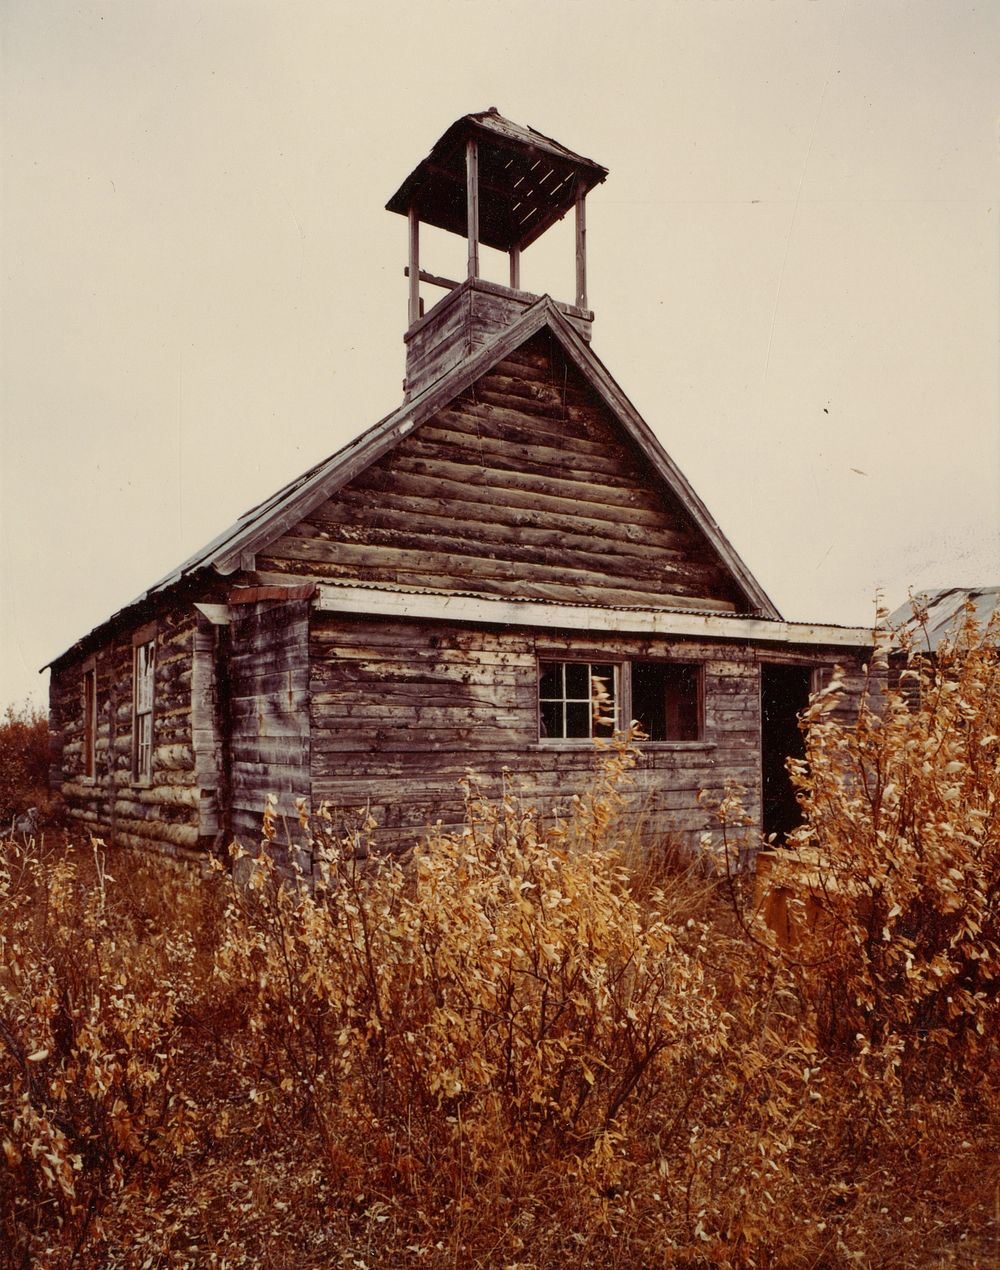 School house. Original public domain image from Flickr